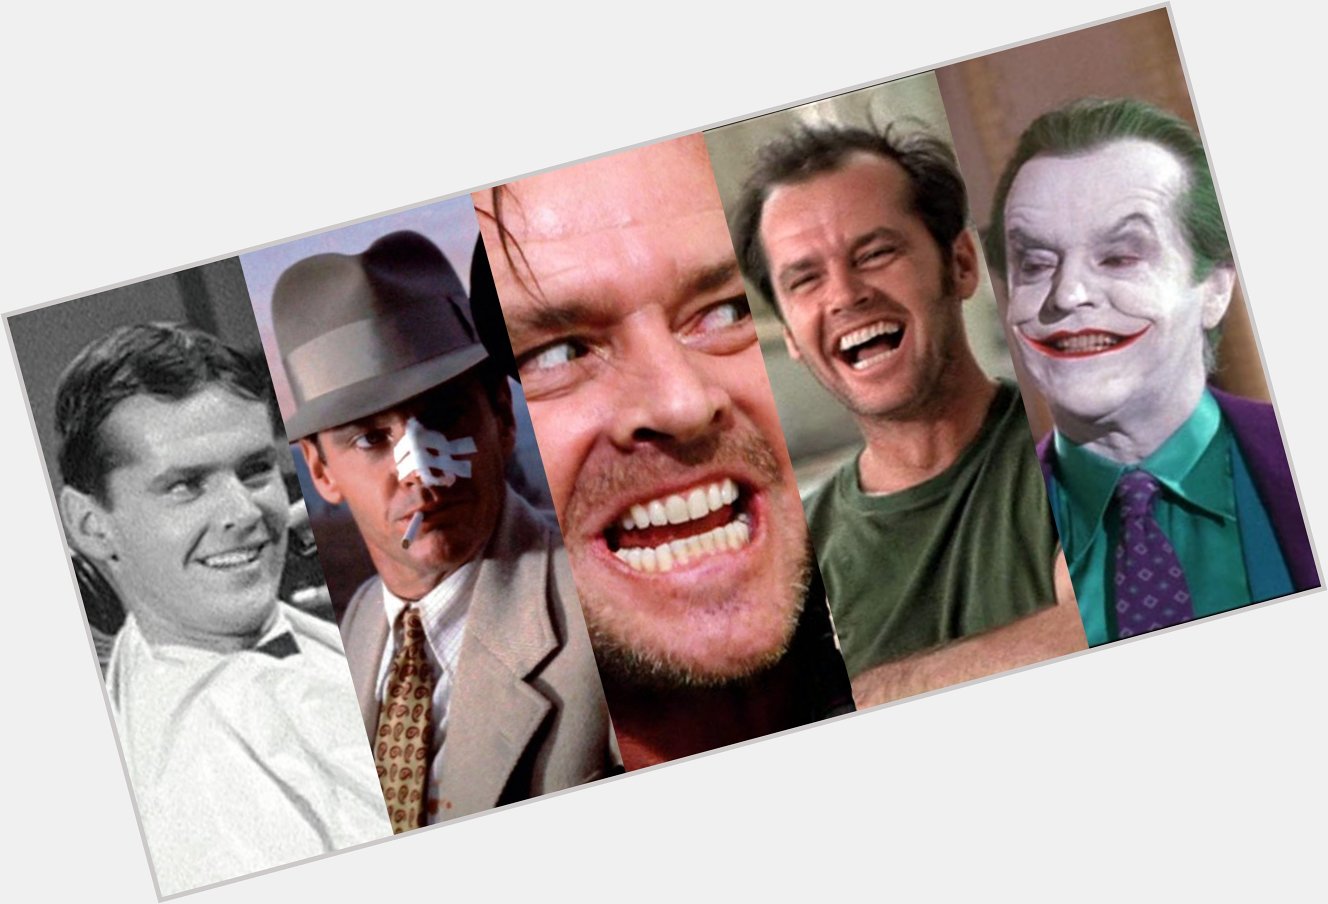 Happy 82nd Birthday Jack Nicholson!
\"The less people know about me, the easier my job is.\" 